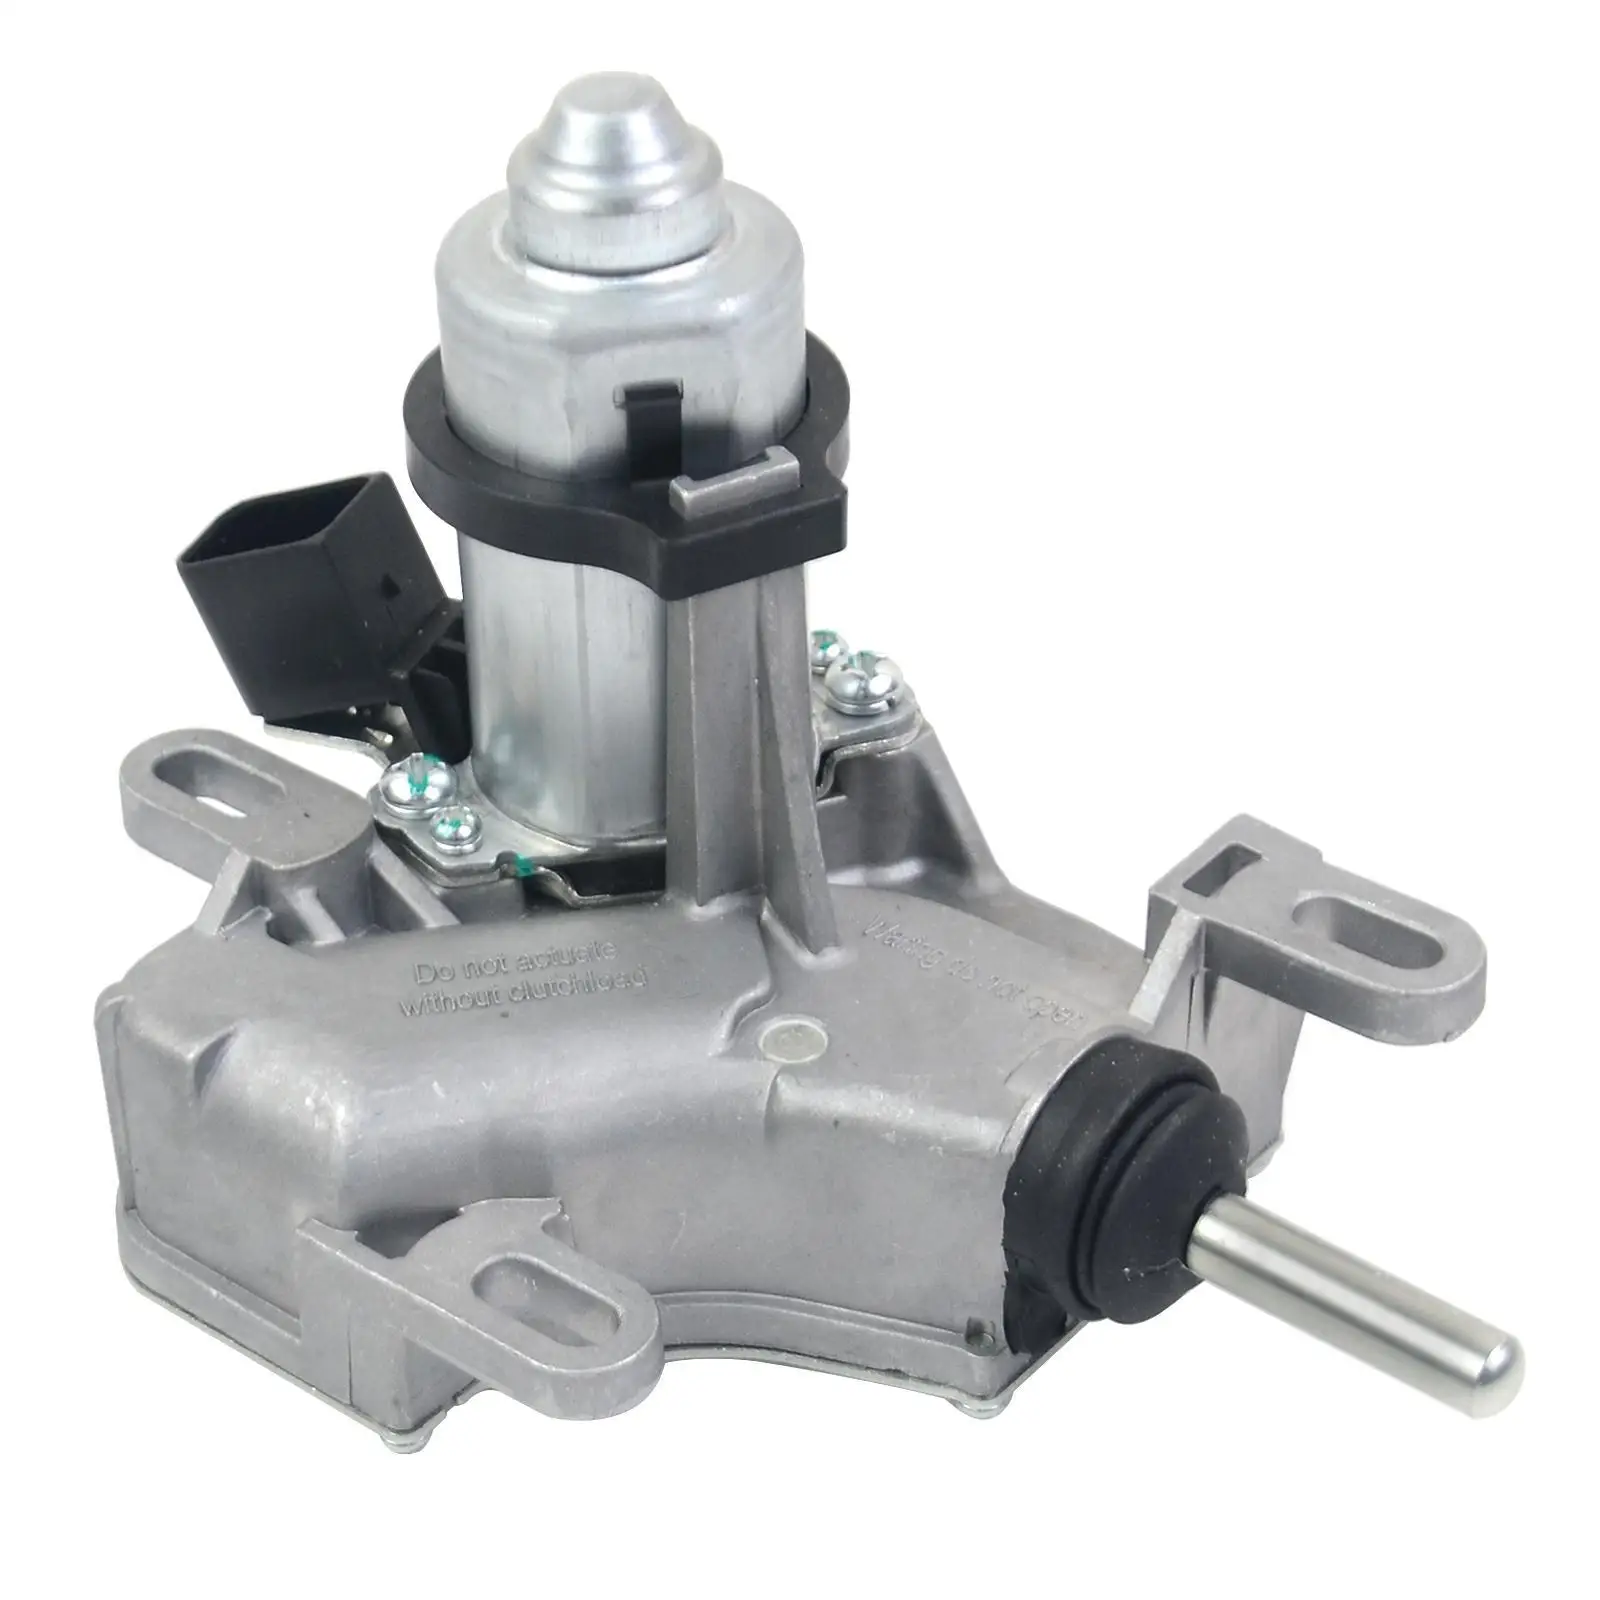 

Clutch Actuator Slave Cylinder Durable Accessories Easy to Install Replaces High Performance Clutch Slave Cylinder Actuator